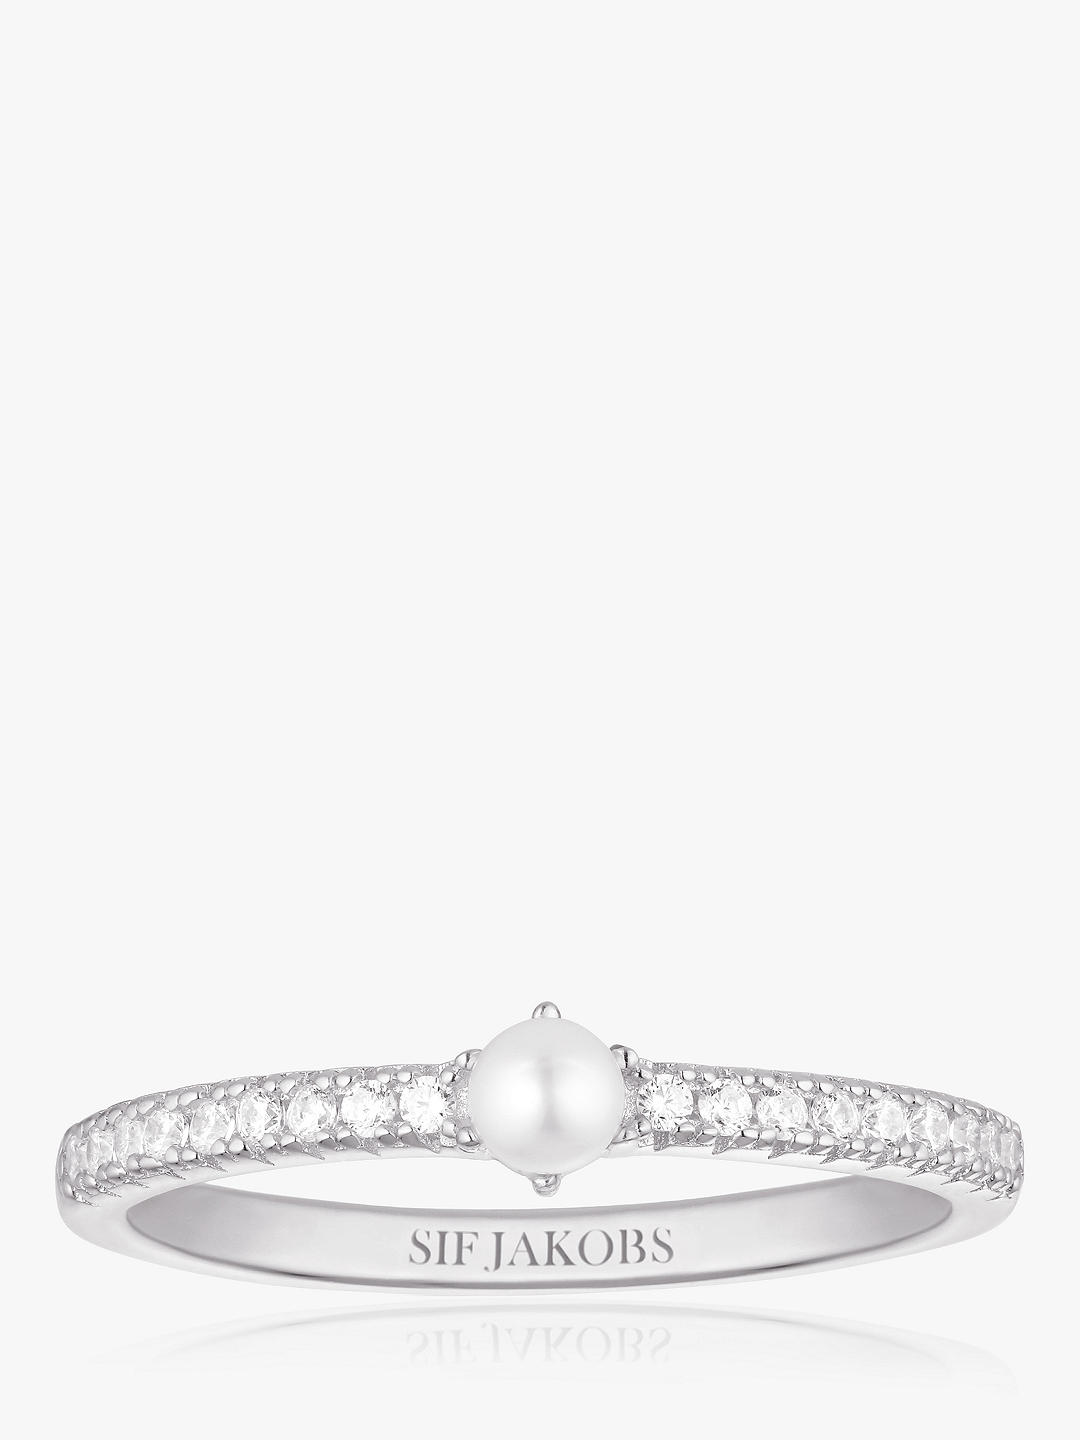 Sif Jakobs Jewellery Pearl Cubic Zirconia Cocktail Ring, Silver, Silver 